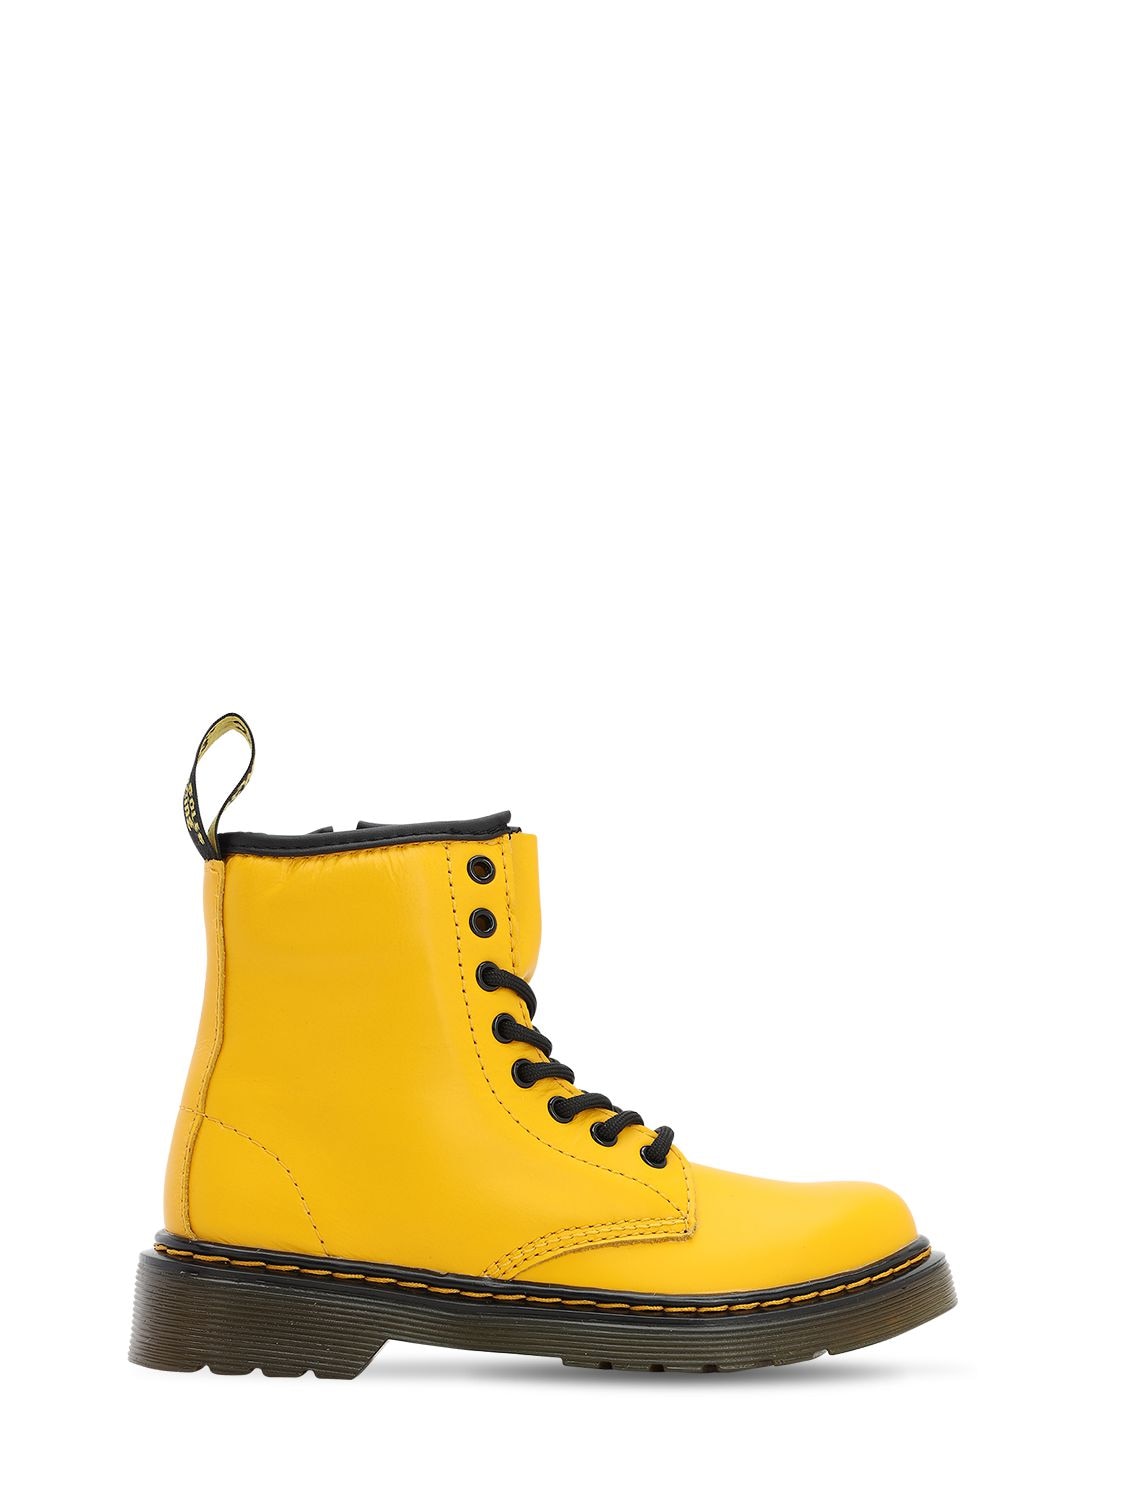 Dr. Martens' Kids' Leather Boots In Yellow